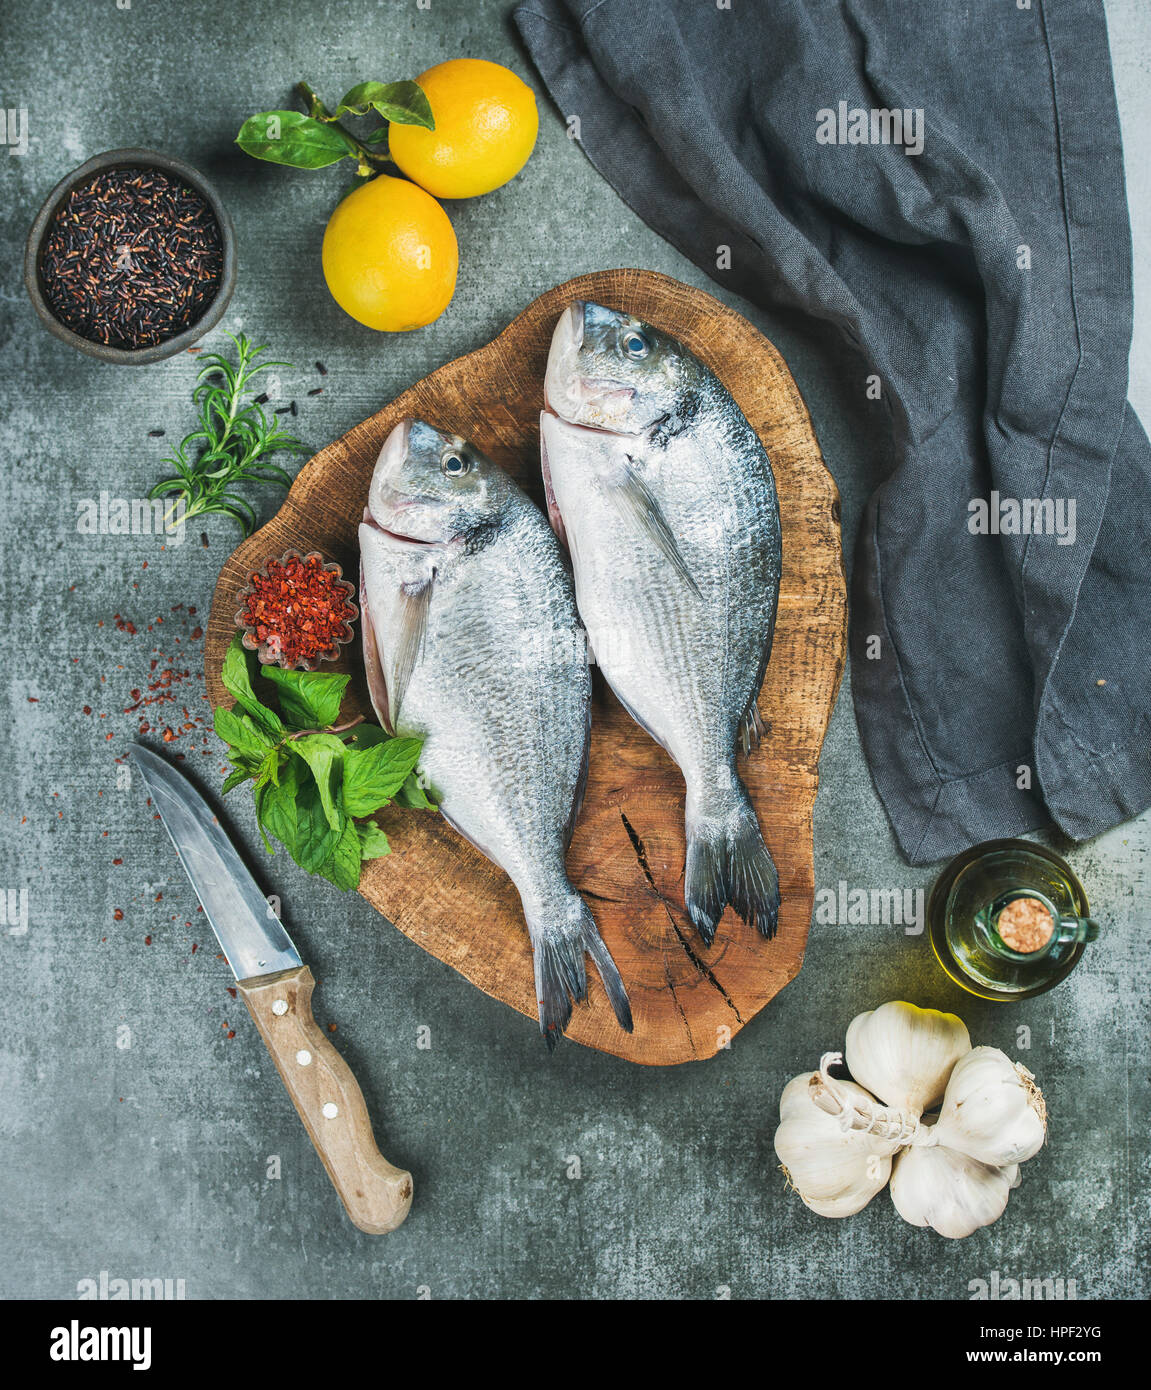 Fresh uncooked sea bream or dorado fish with lemon, herbs, olive oil, garlic and spices in bowls on rustic wooden board over grey concrete background, Stock Photo